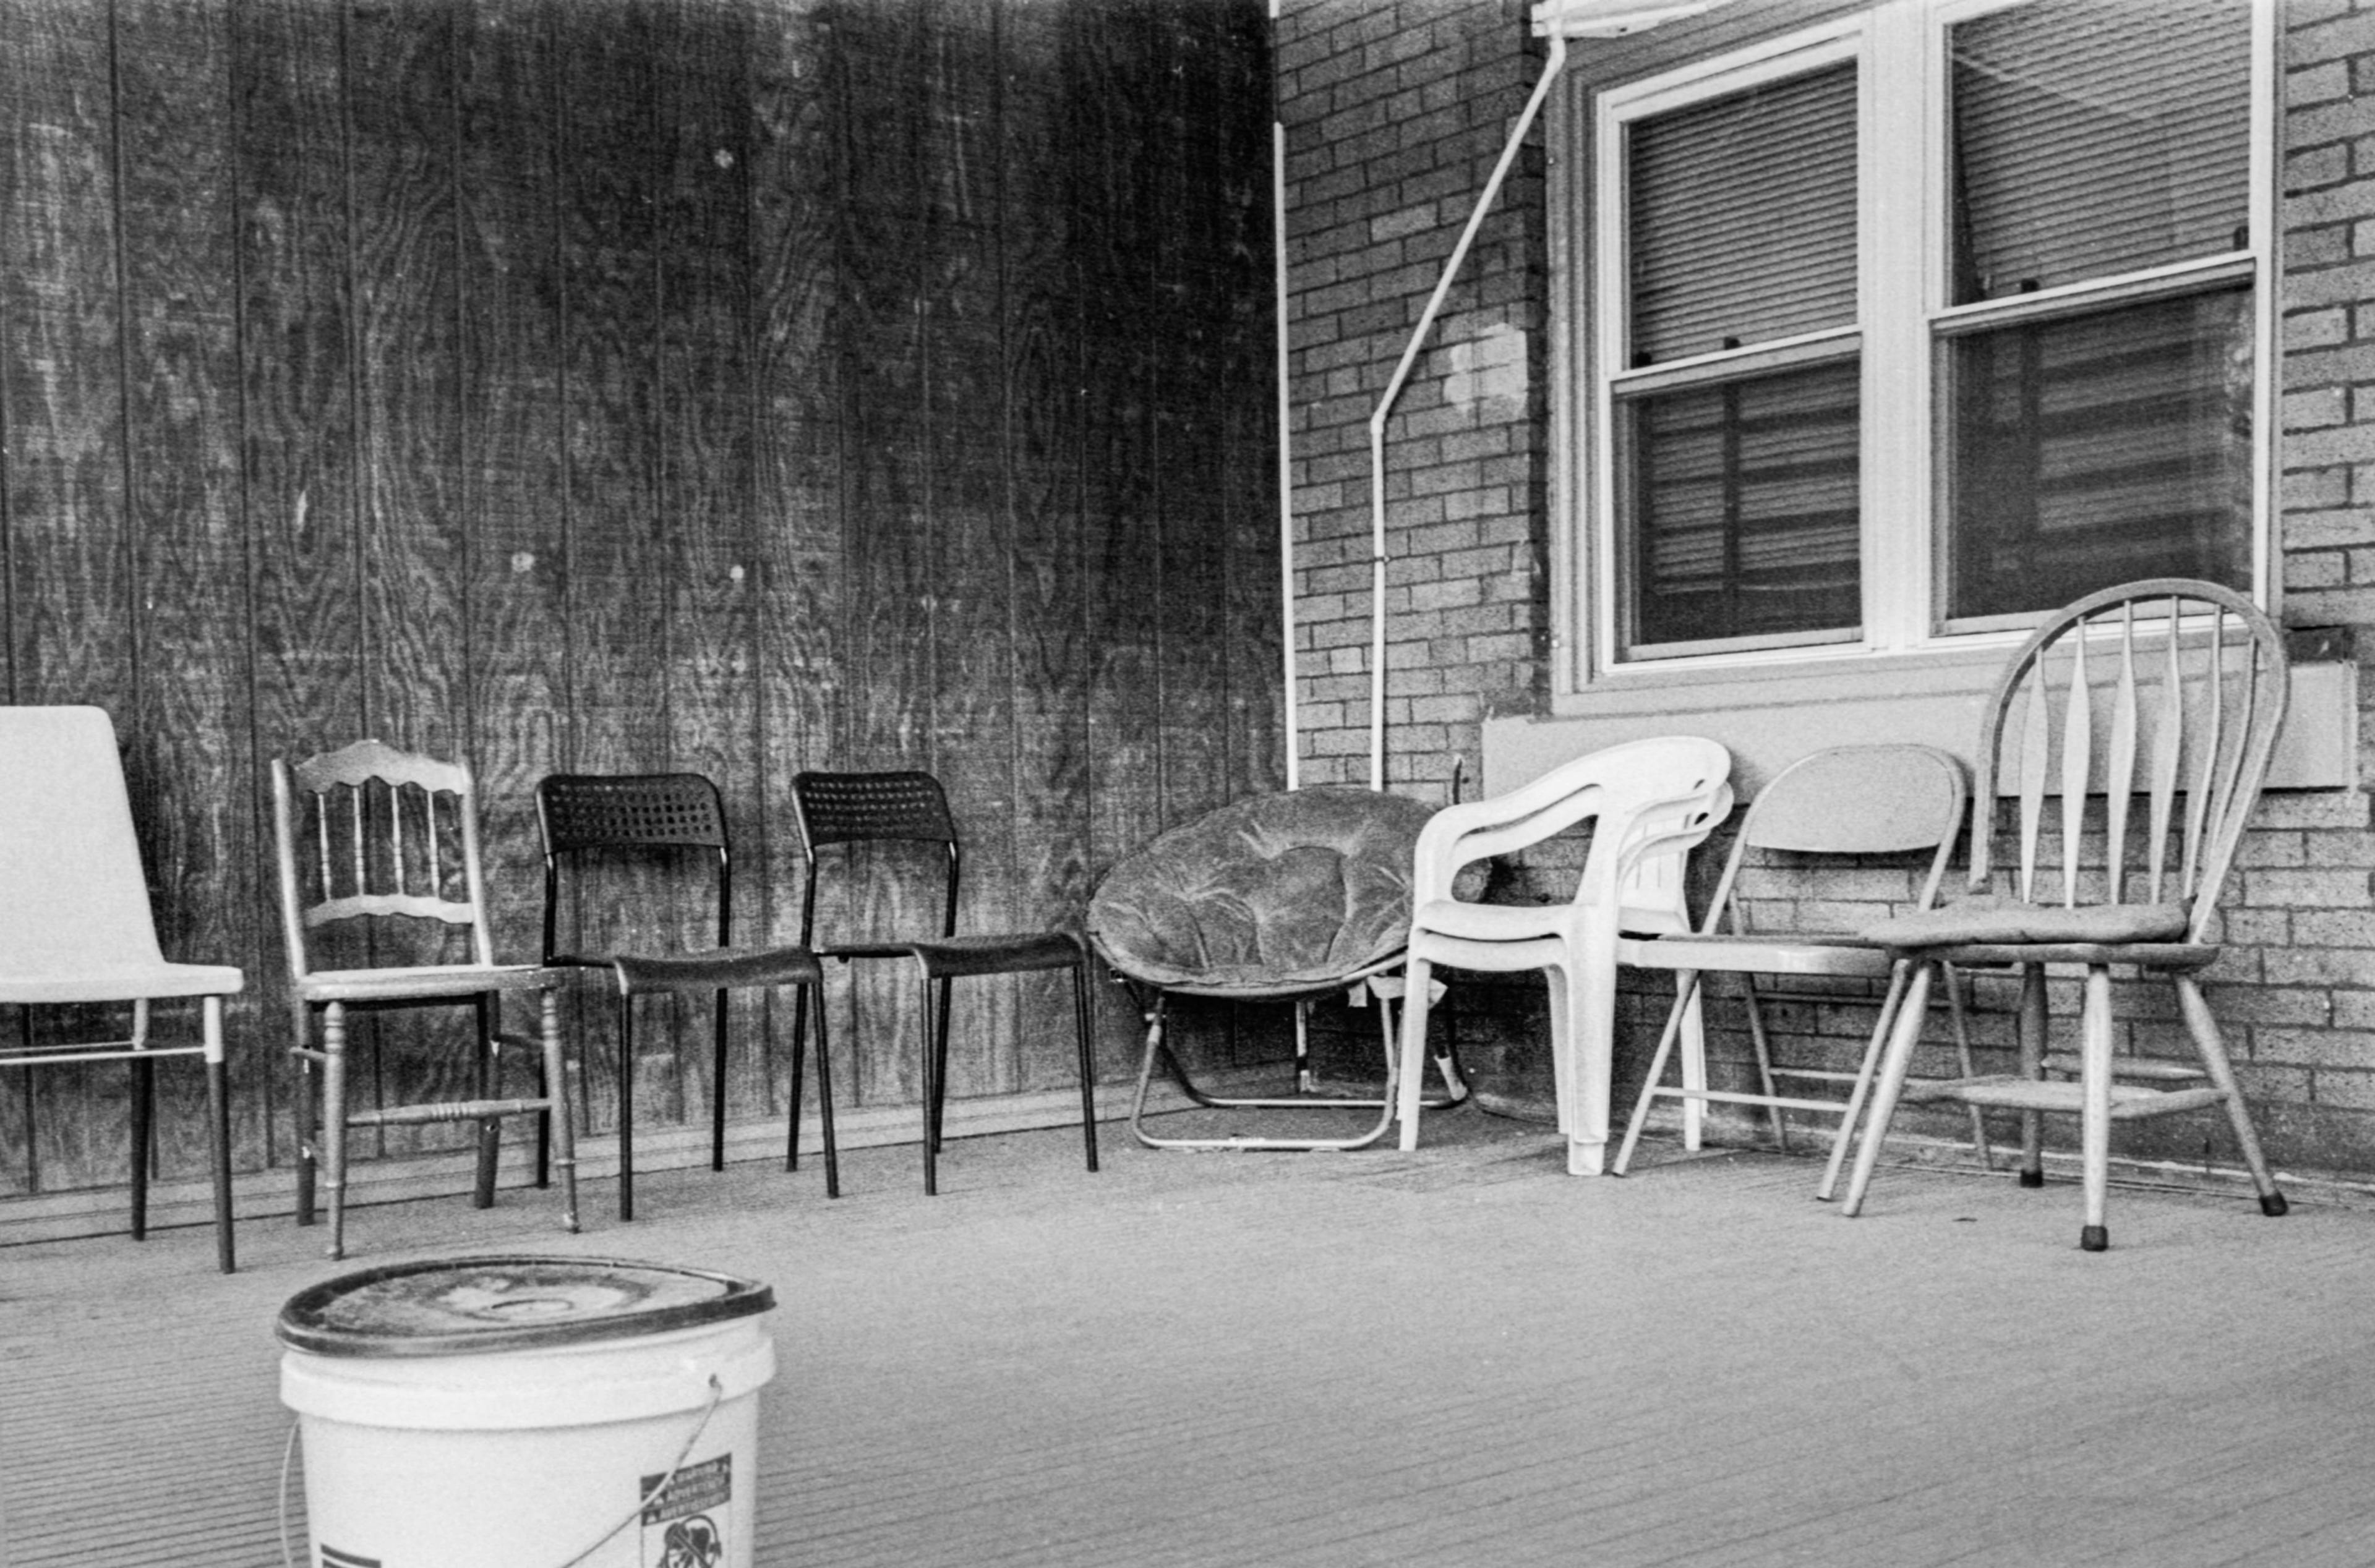 A porch with a collection of mismatched chairs.